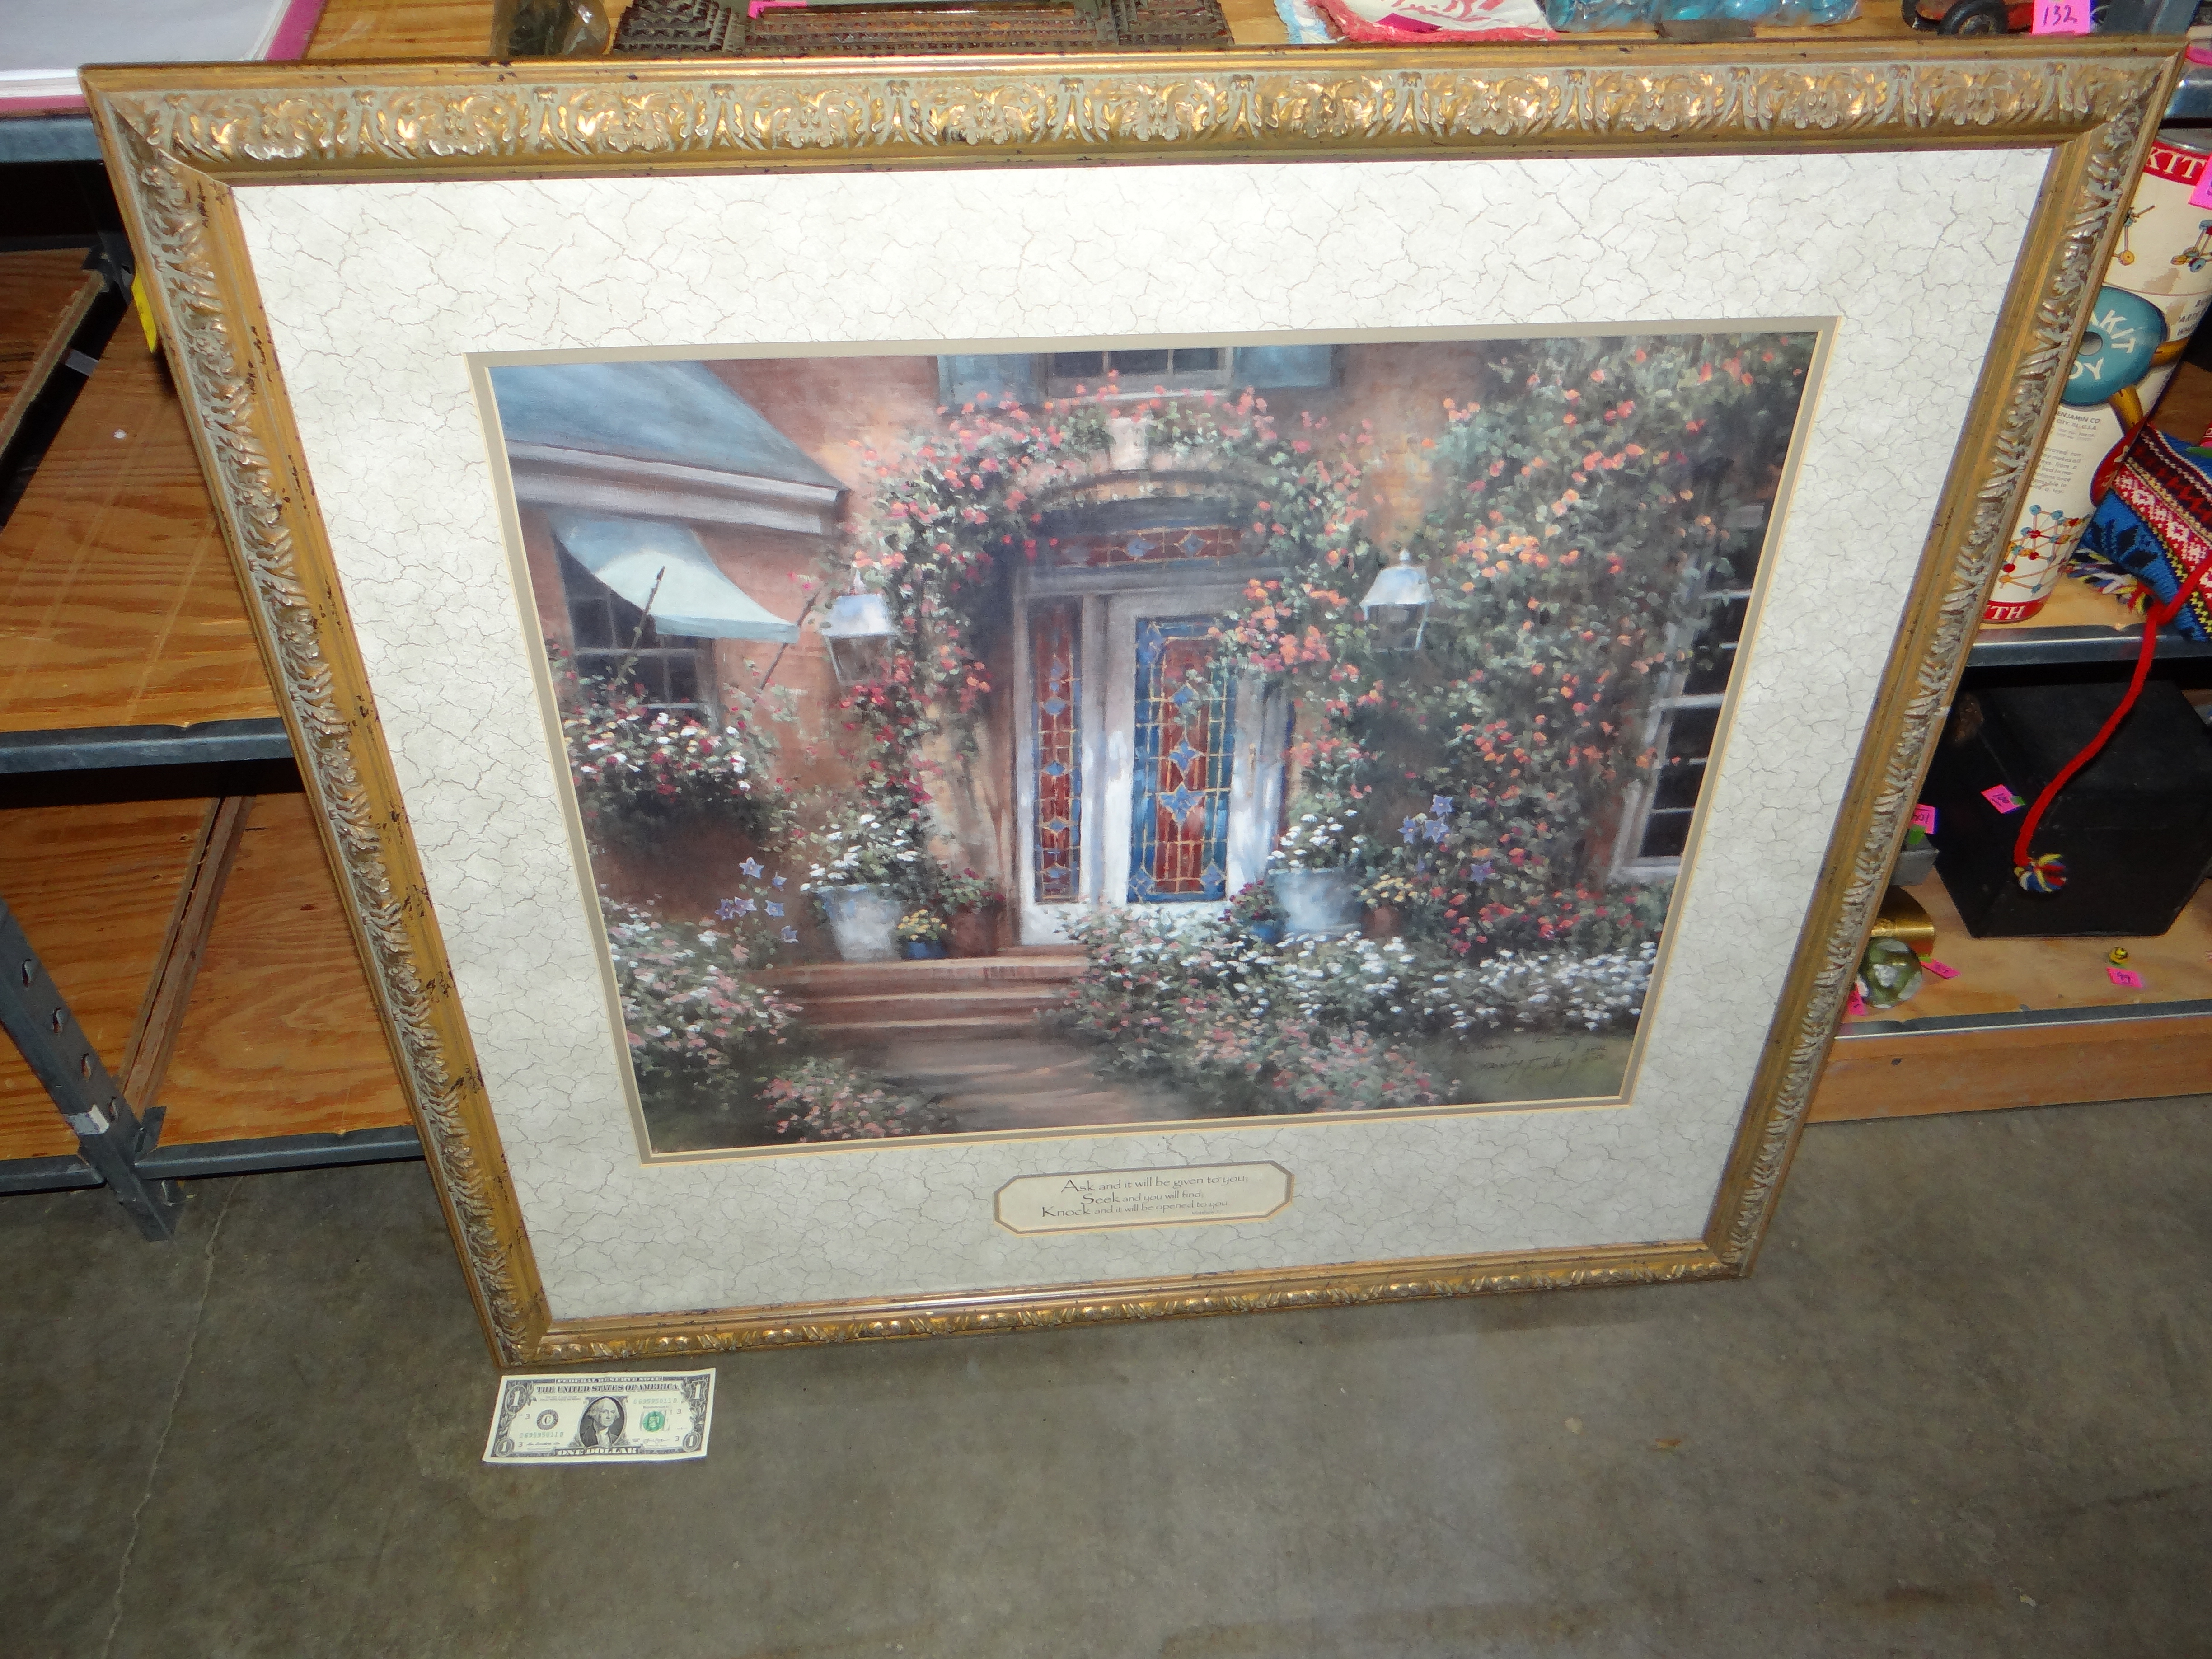 132-Beautiful Framed & Matted w/ Glass Print of A Front Door w/ Flowers Climbing The House & A Scripture Underneath